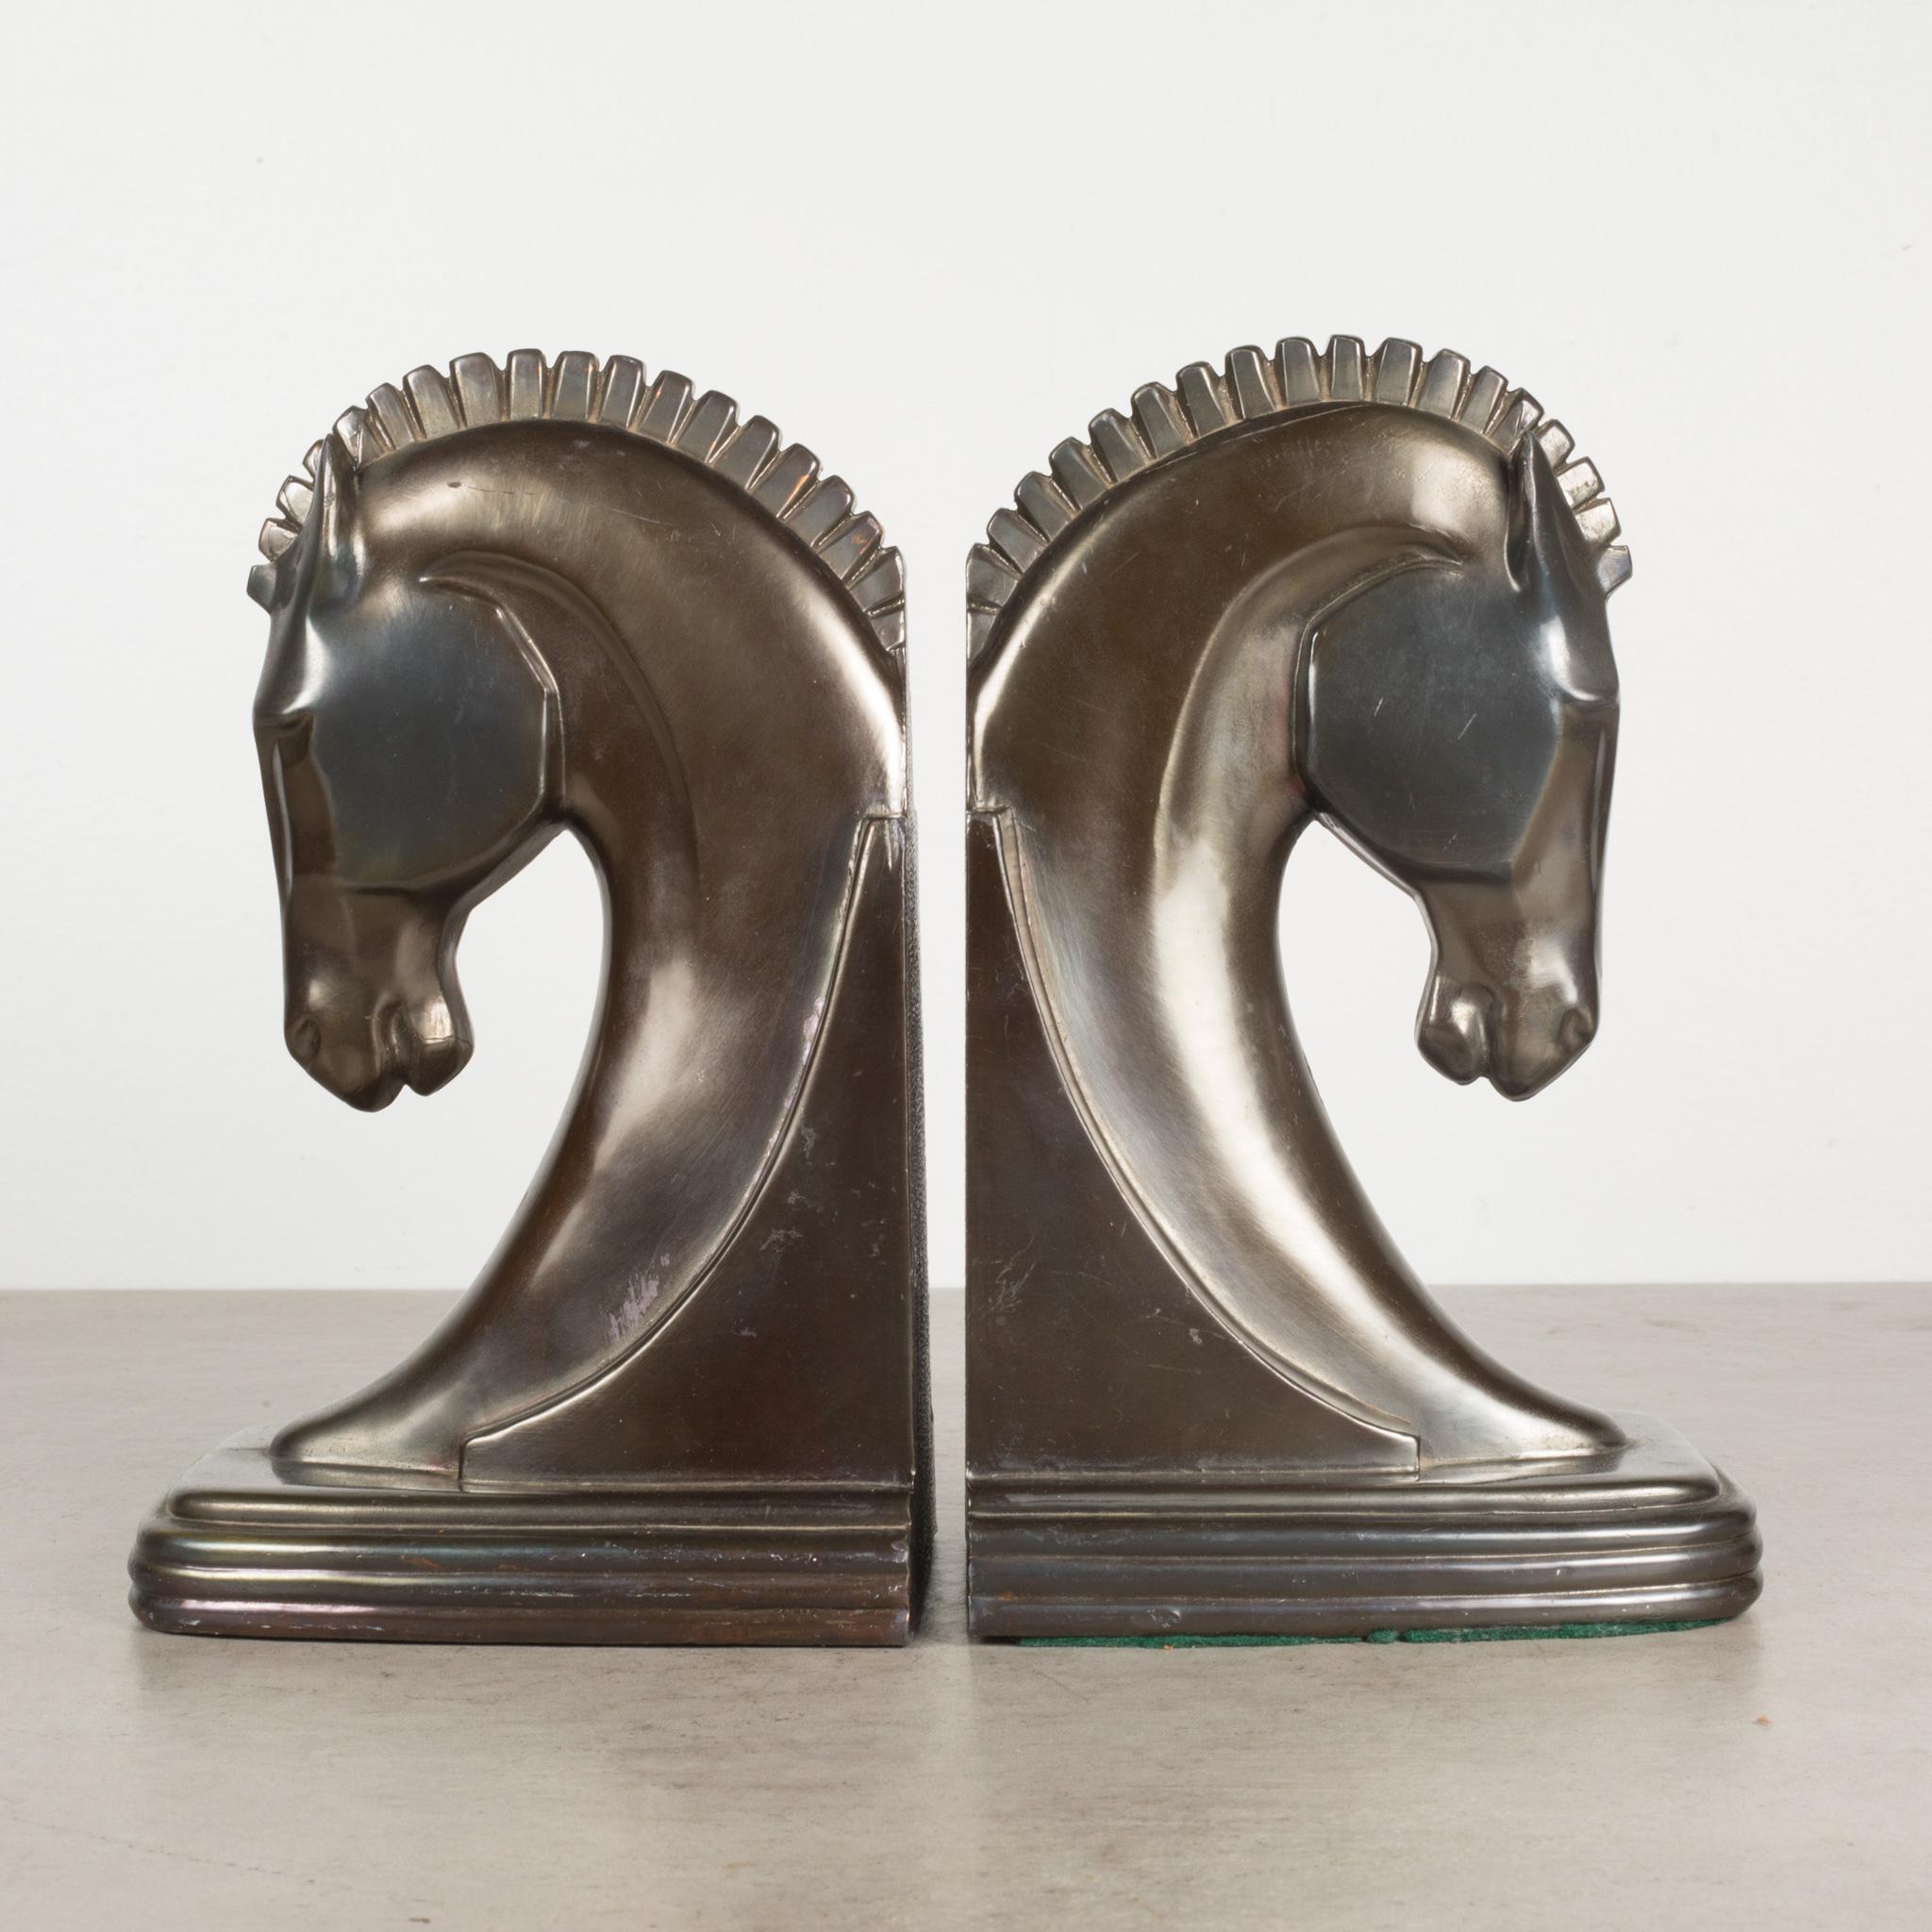 ABOUT

An original pair of Art Deco style cast gray or 